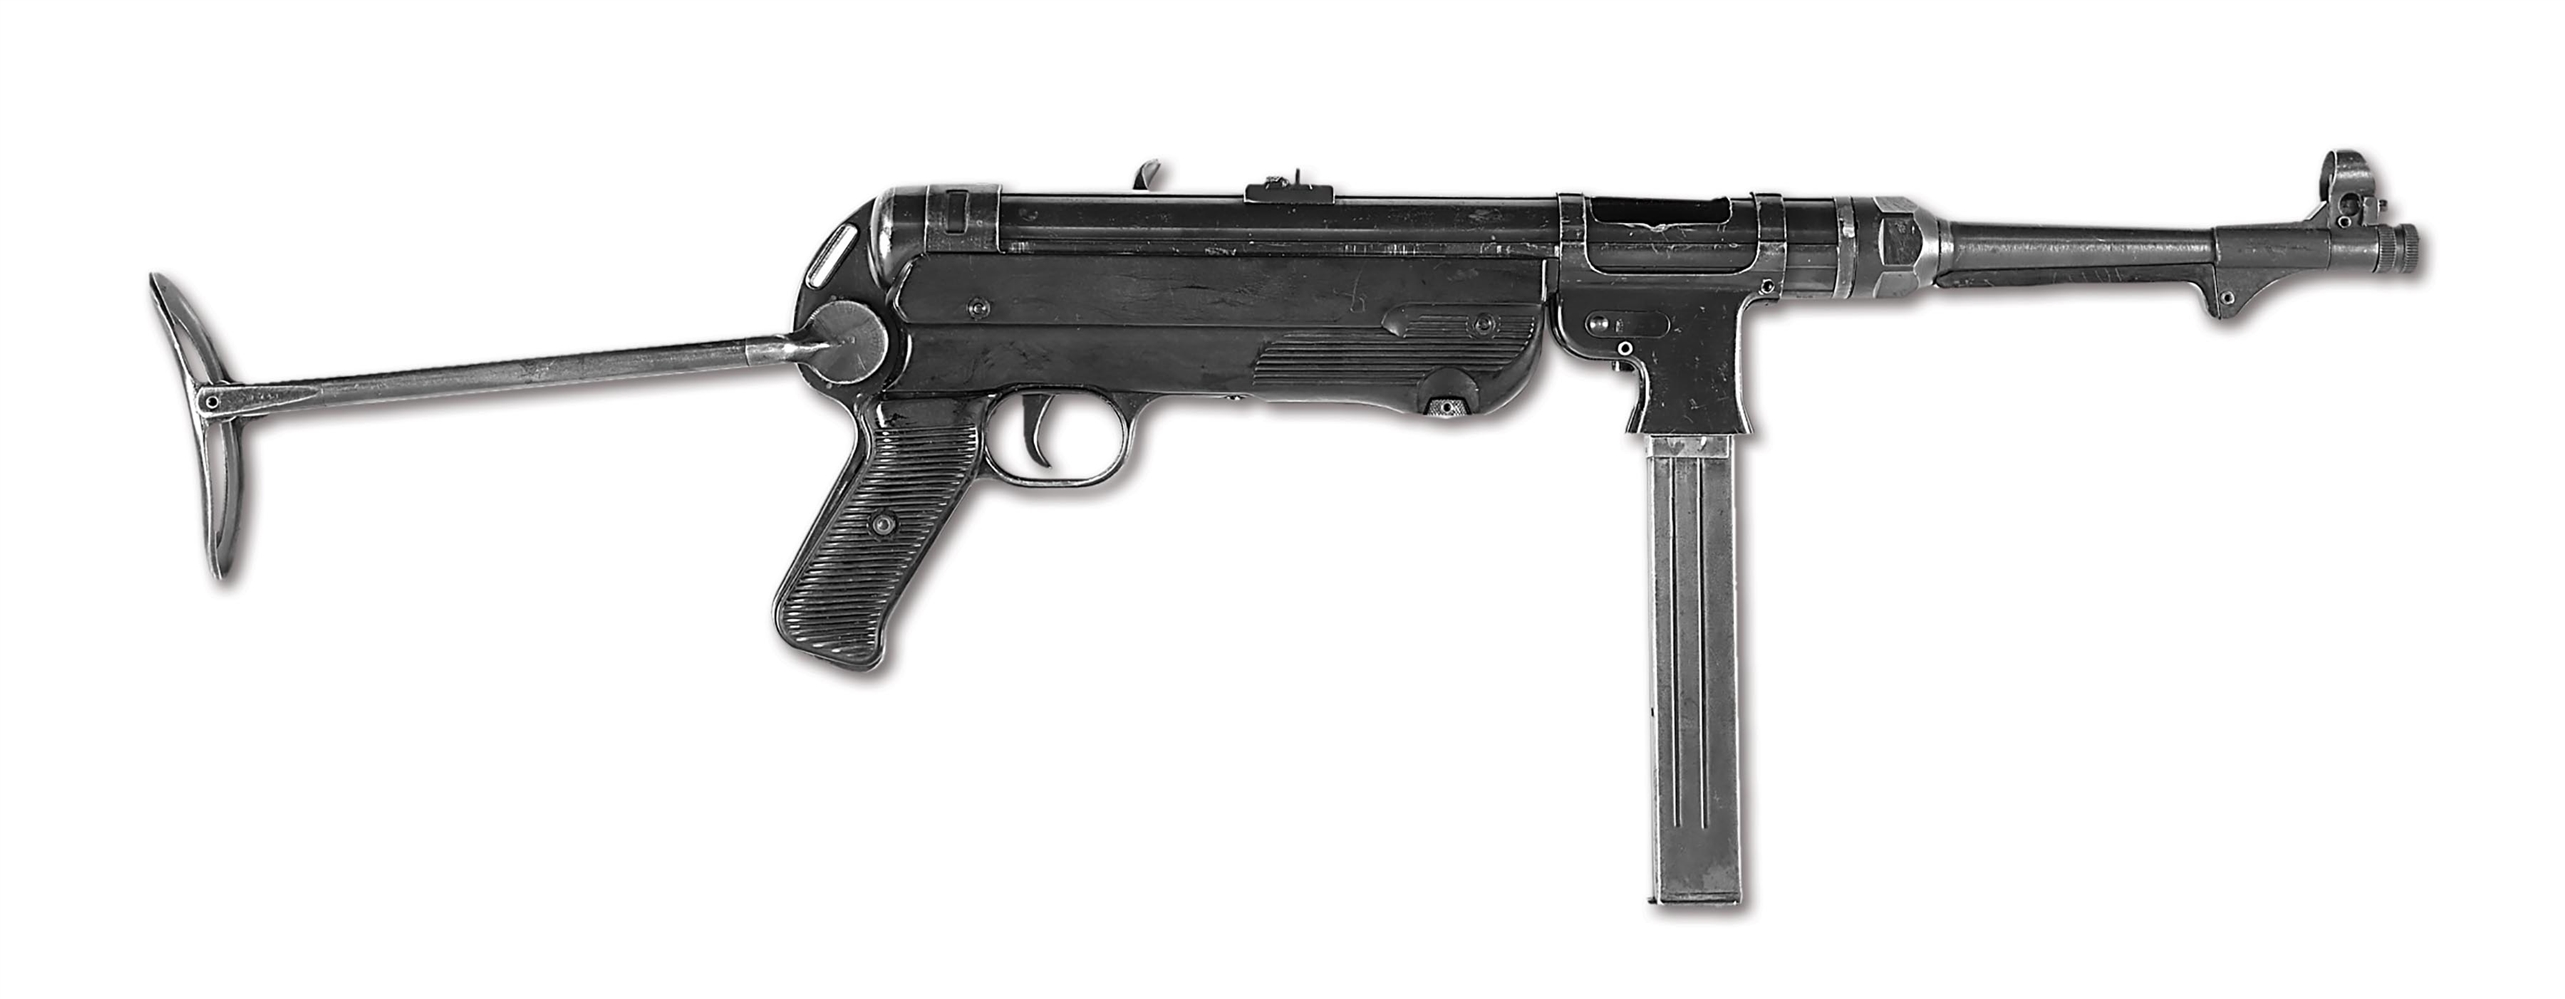 (N) MAGNIFICENT AND VERY SCARCE EARLY MP-40 MACHINE GUN WITH UNMODIFIED RECEIVER SLOT AND “HOOK TYPE” MATCHING BOLT (CURIO & RELIC).